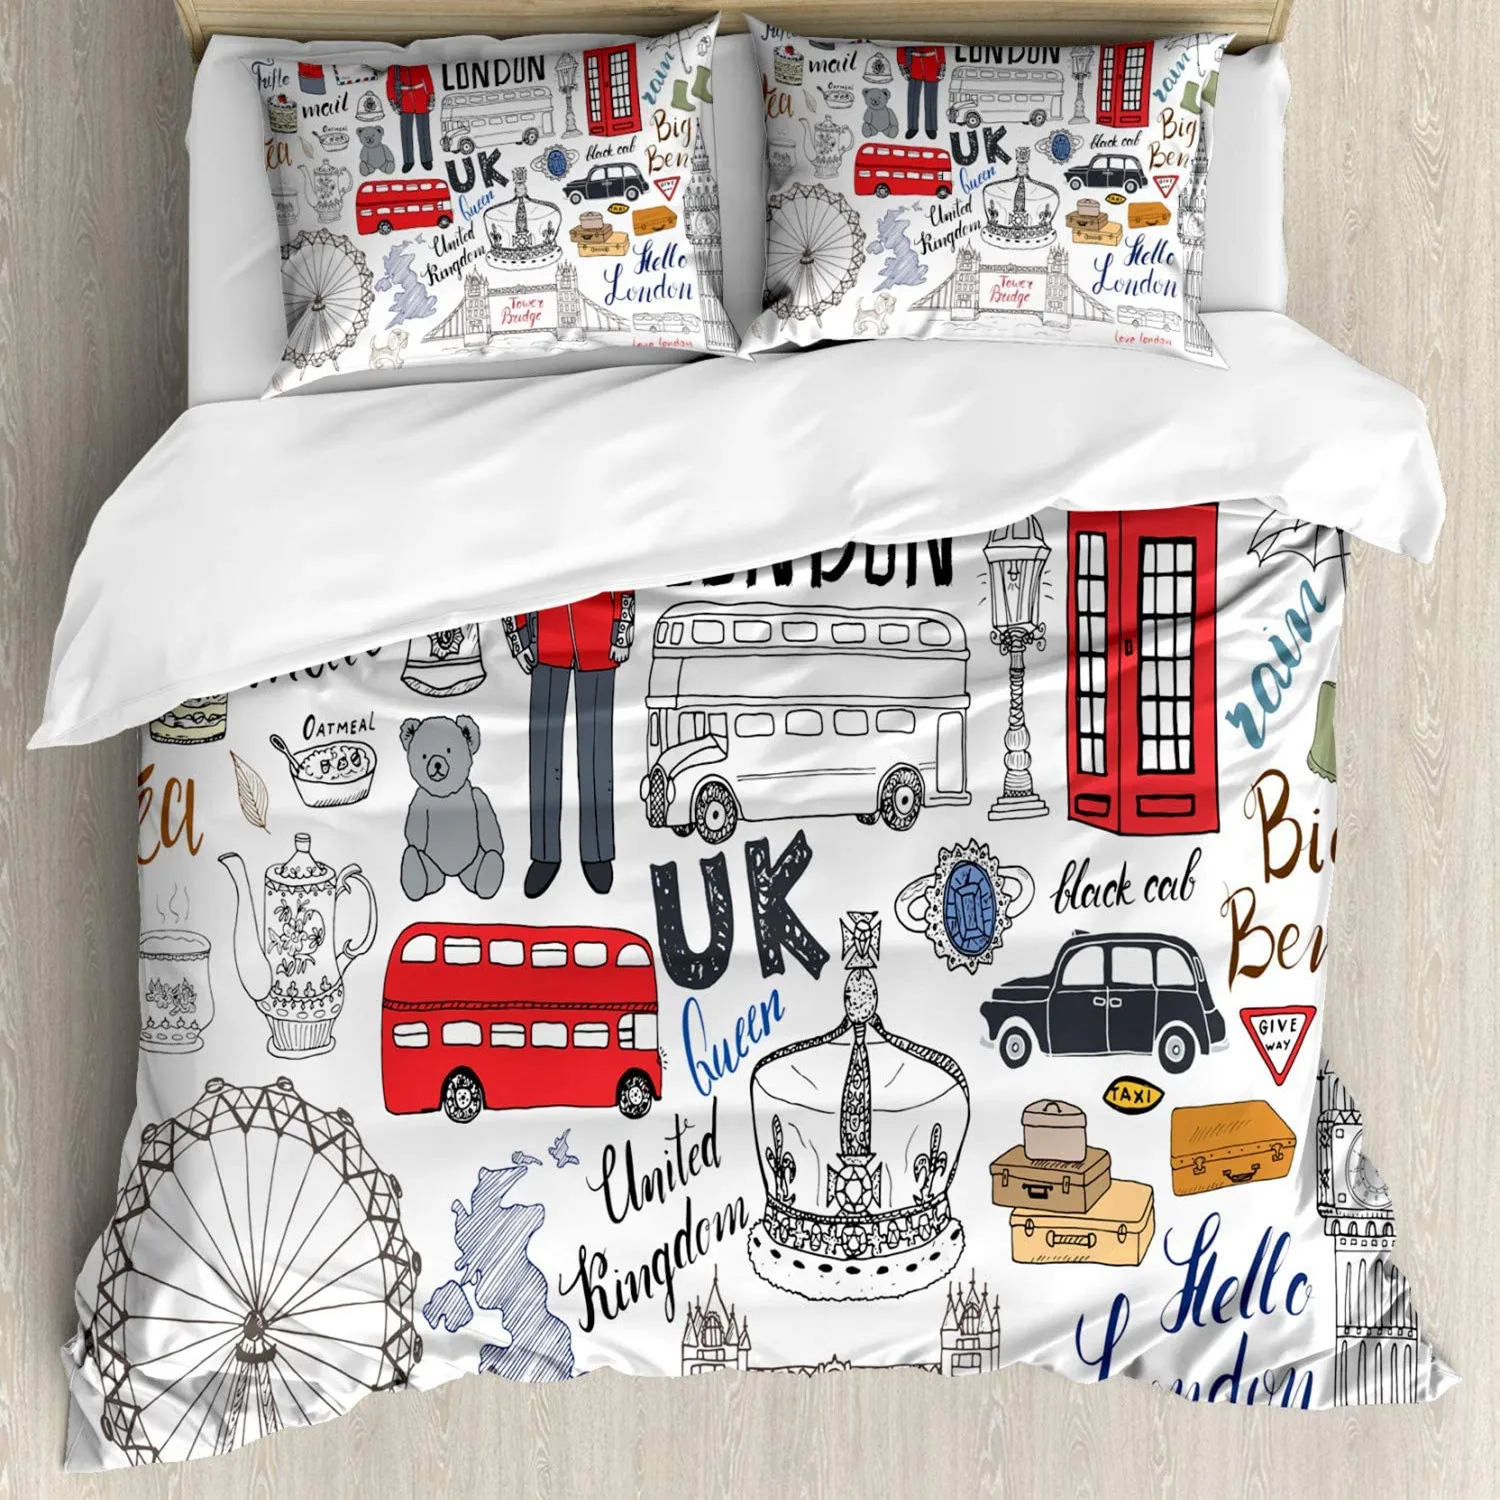 

Hipster Duvet Cover London Double Decker Bus Telephone Booth Cab Crown of United Kingdom Big Ben Polyester Quilt Cover Full King